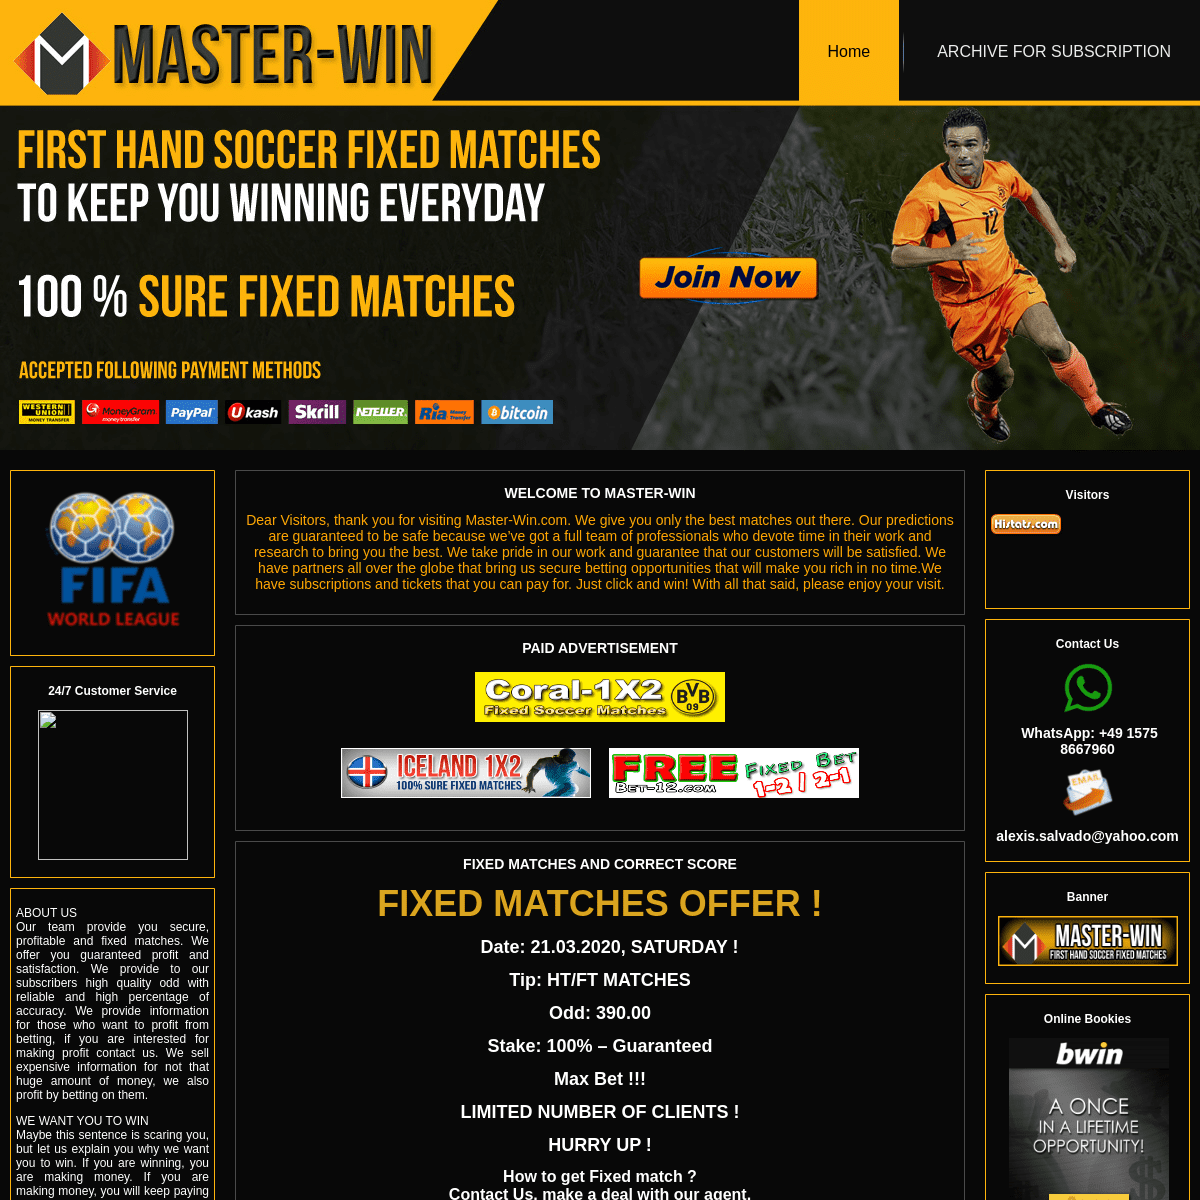 A complete backup of master-win.com